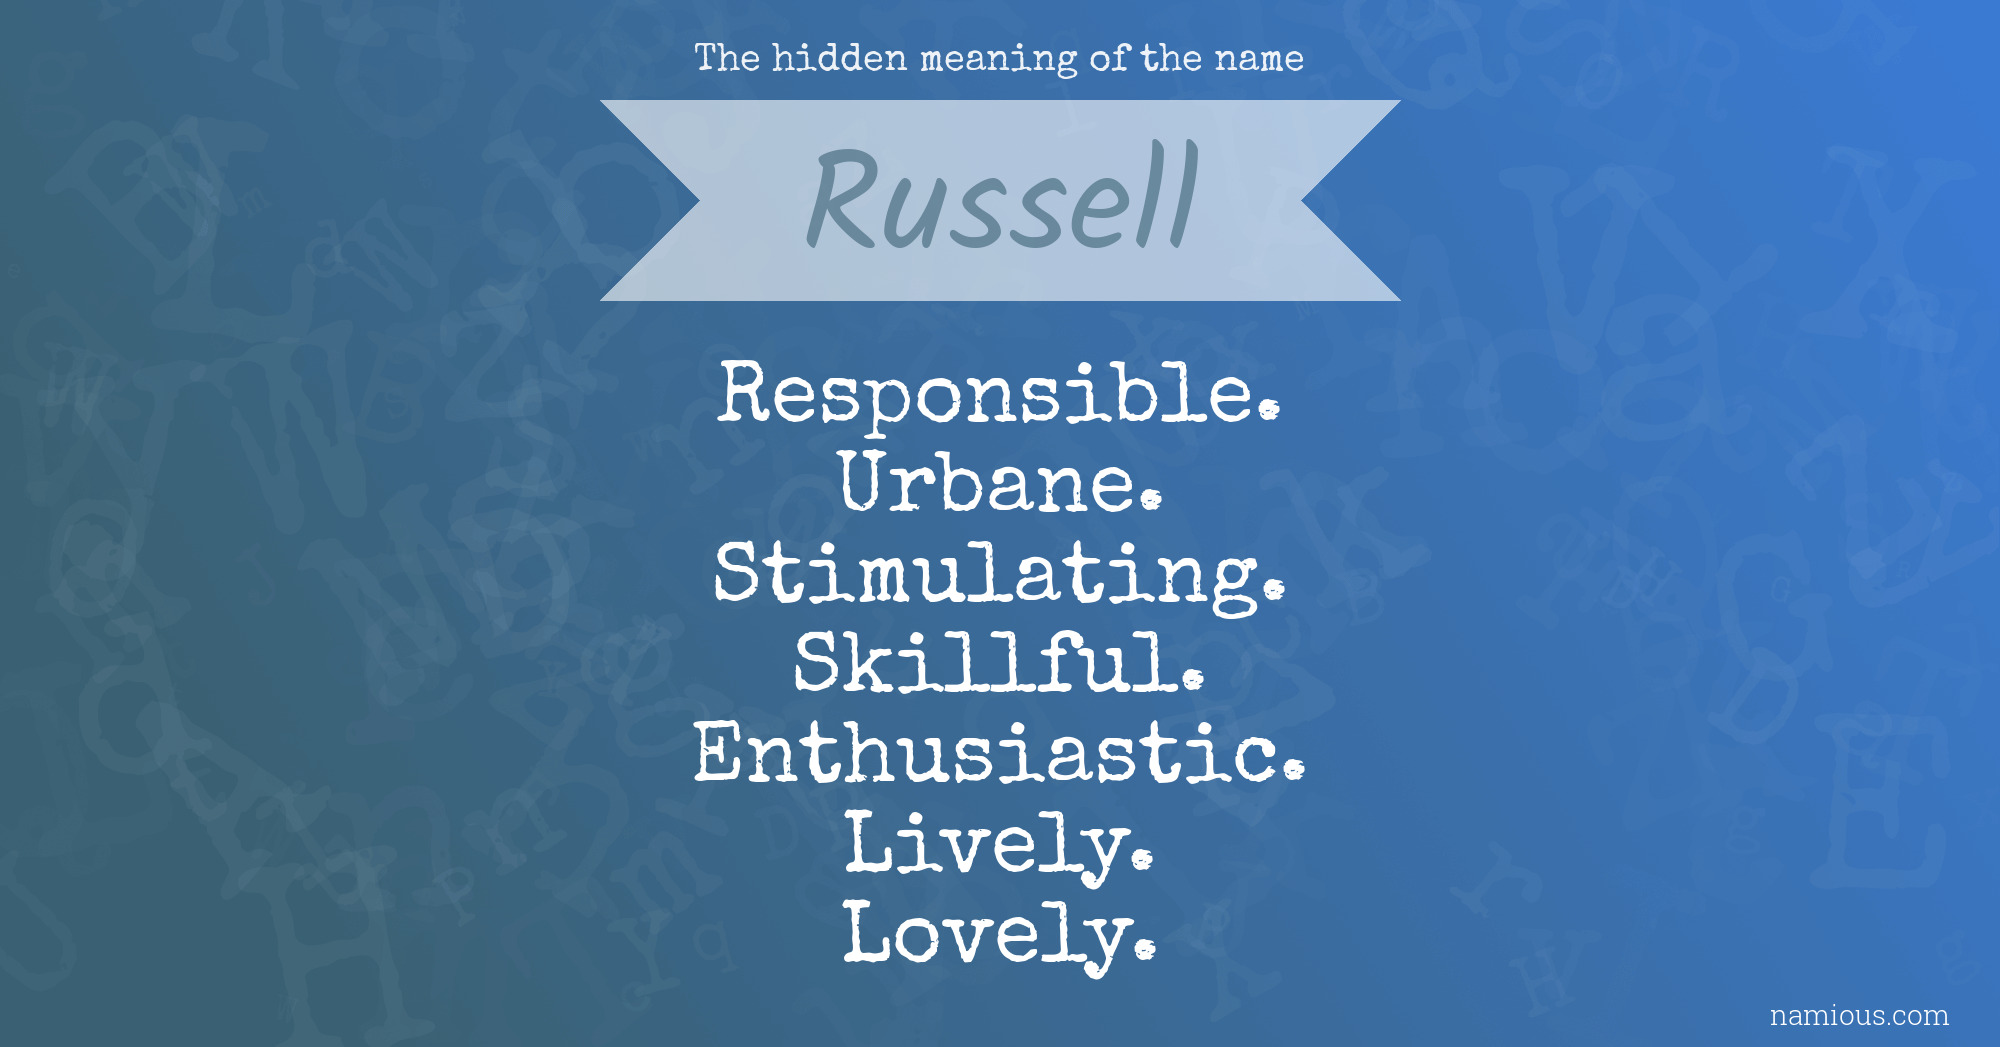 The hidden meaning of the name Russell